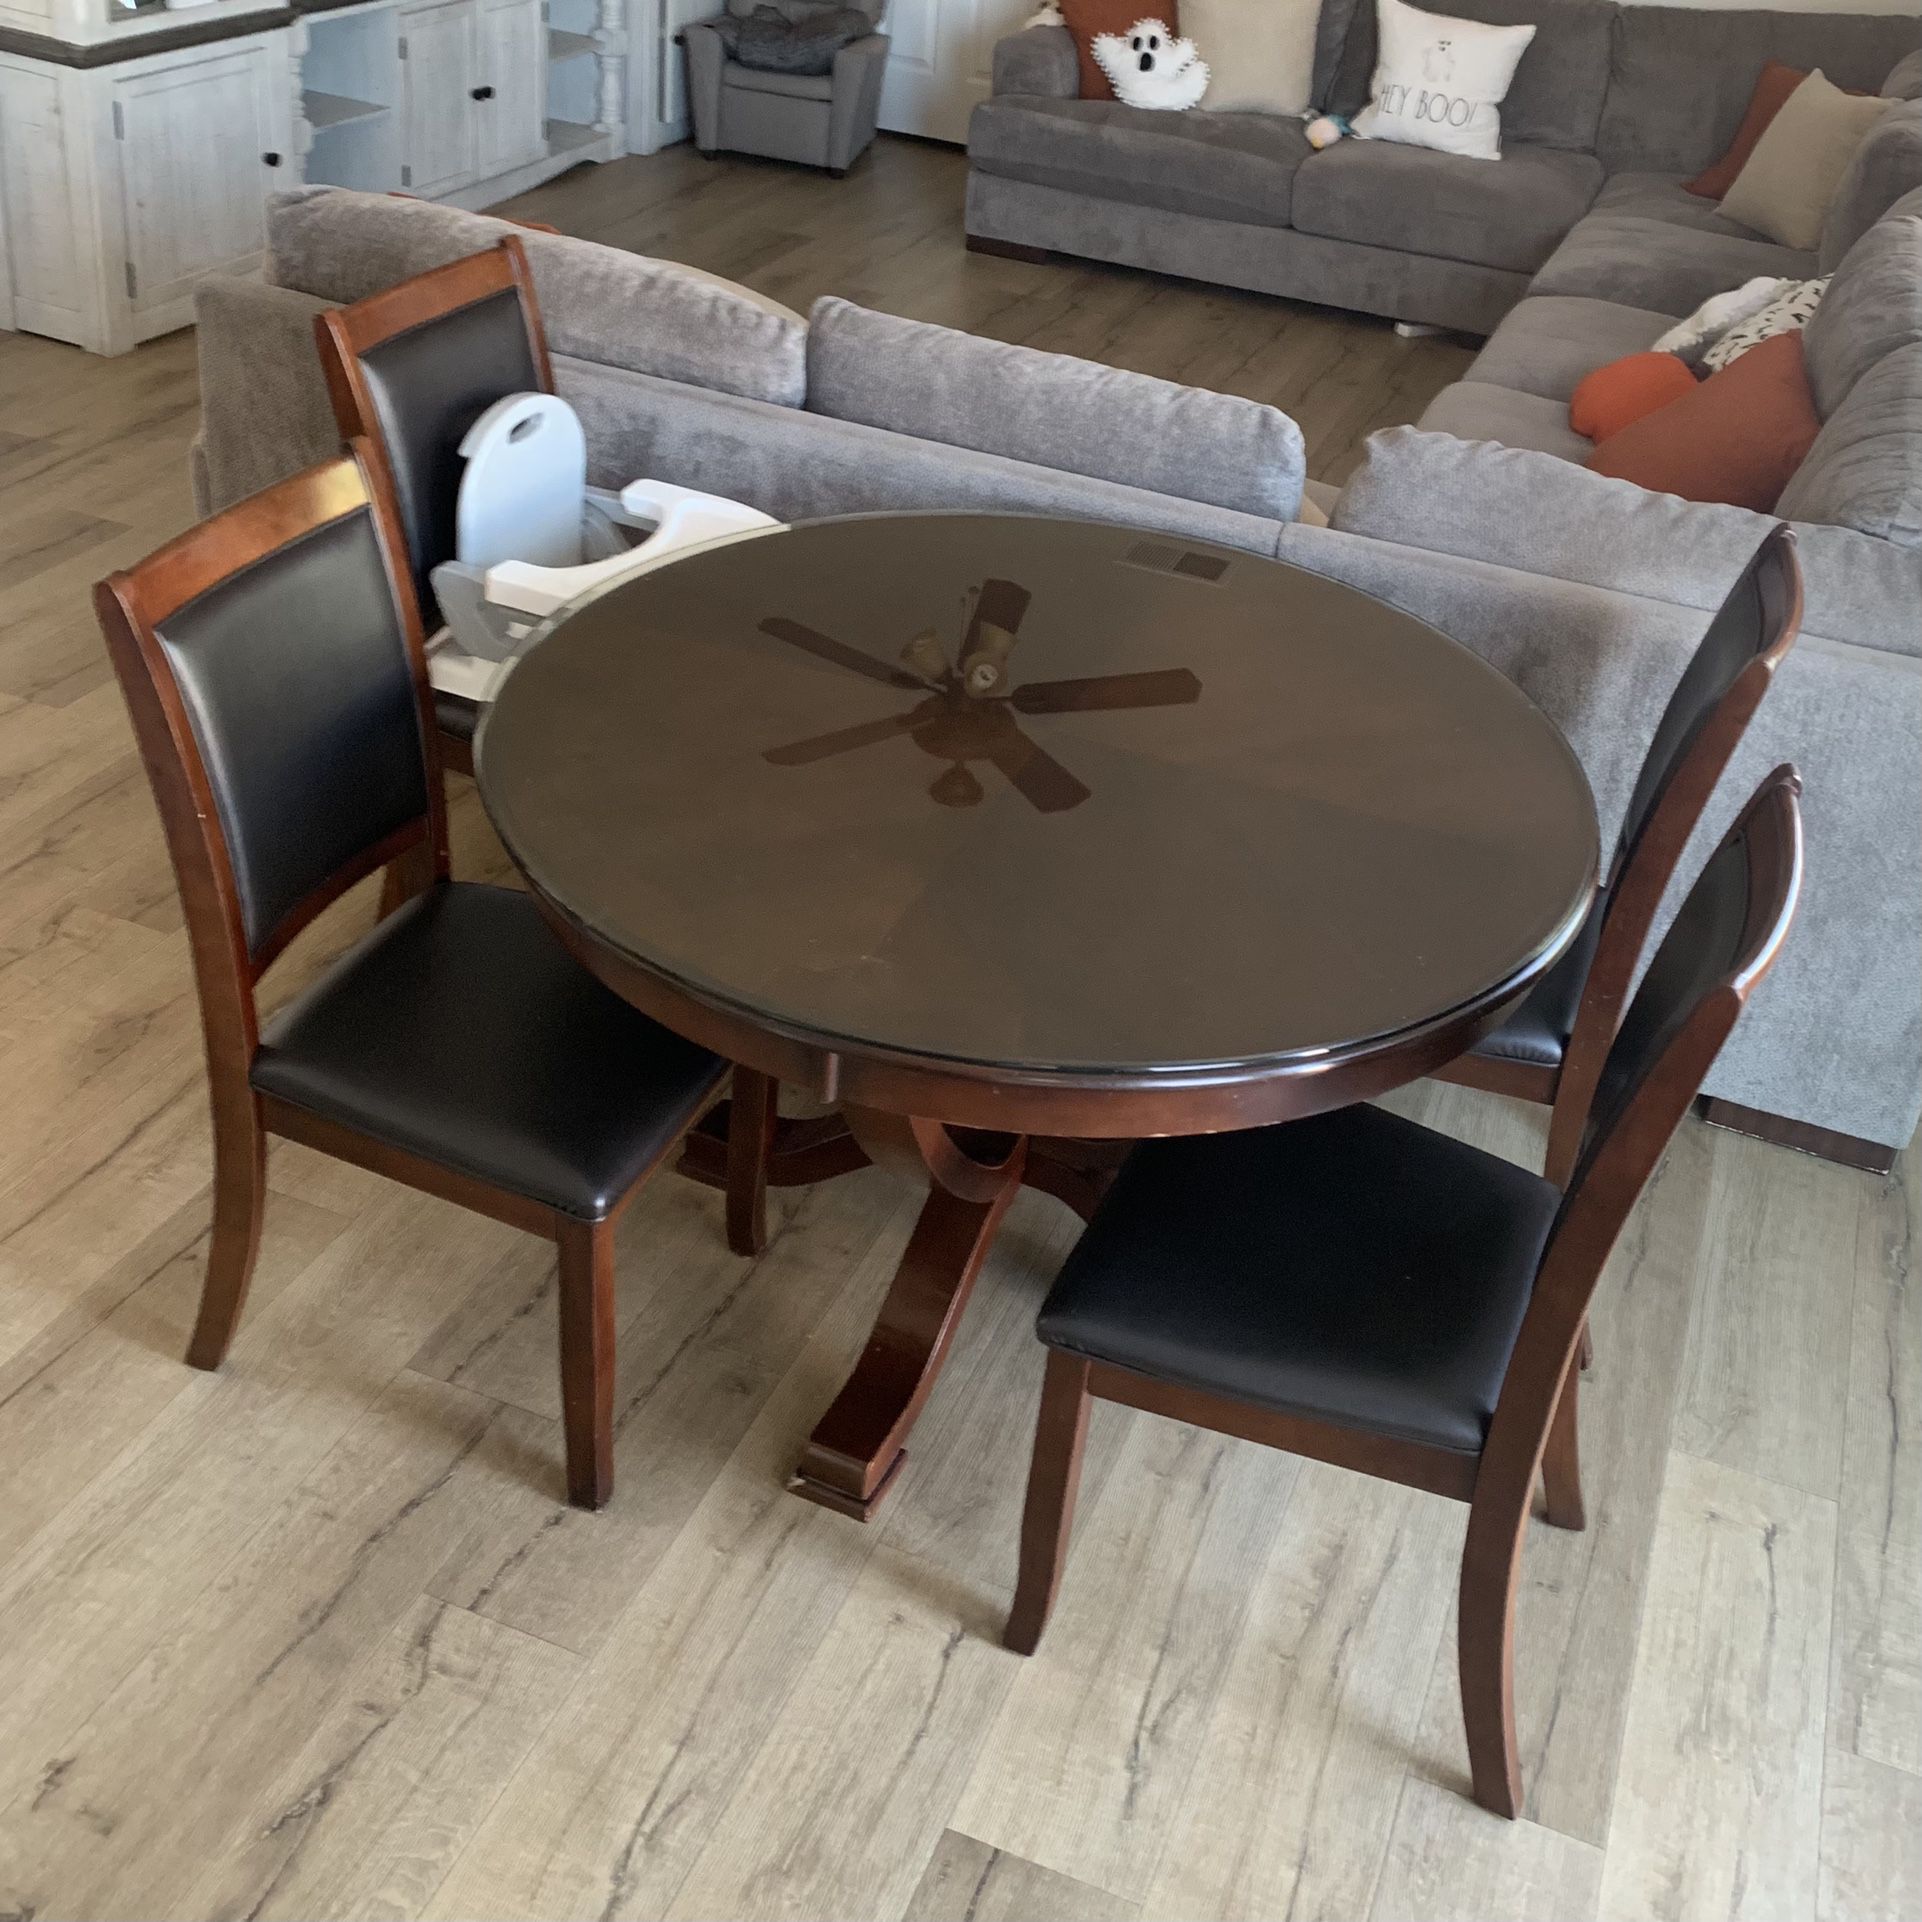 Kitchen Table With Glass Top And Chairs